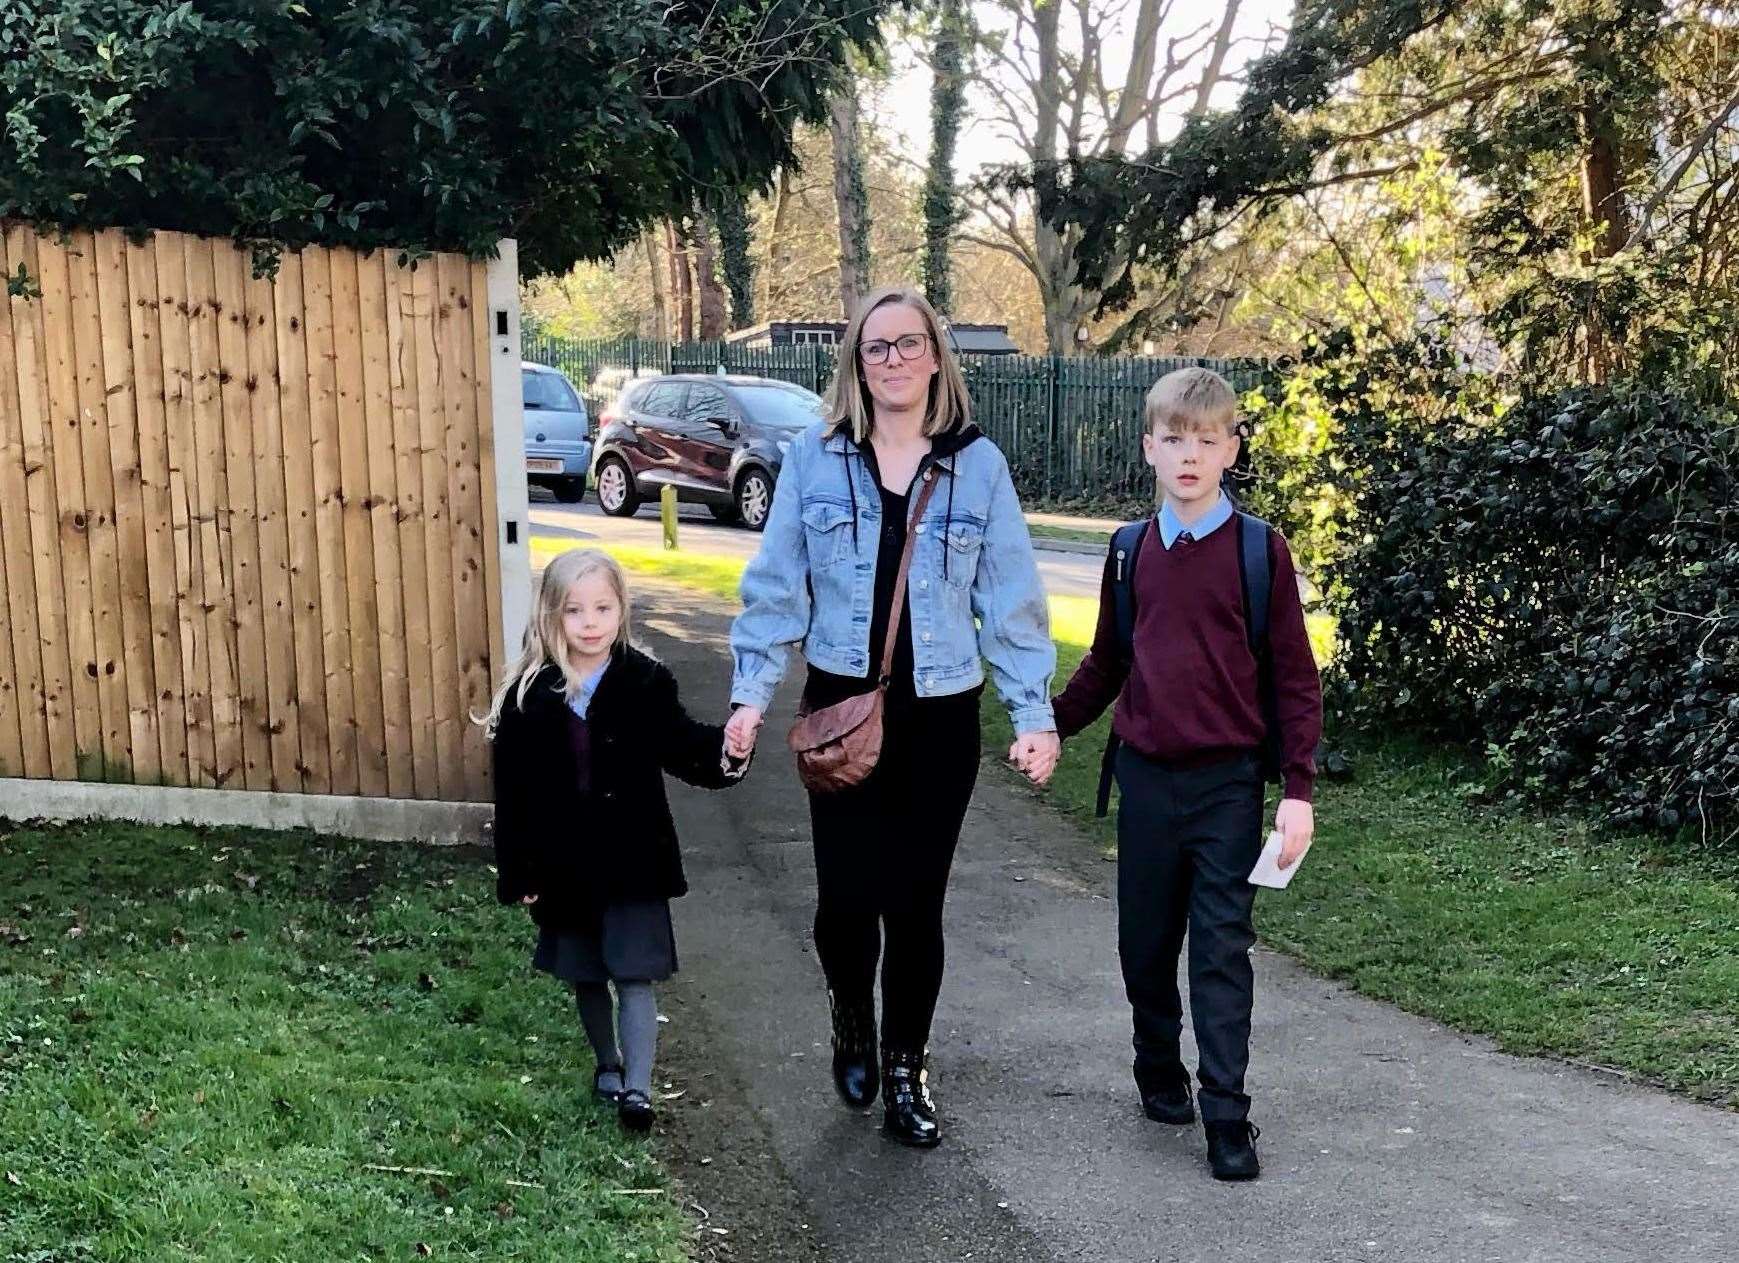 Jodie Murphy and her children Rowan and Laila walking on the walk to Tunbury Primary School where there's been a 20-year fight to improve road safety